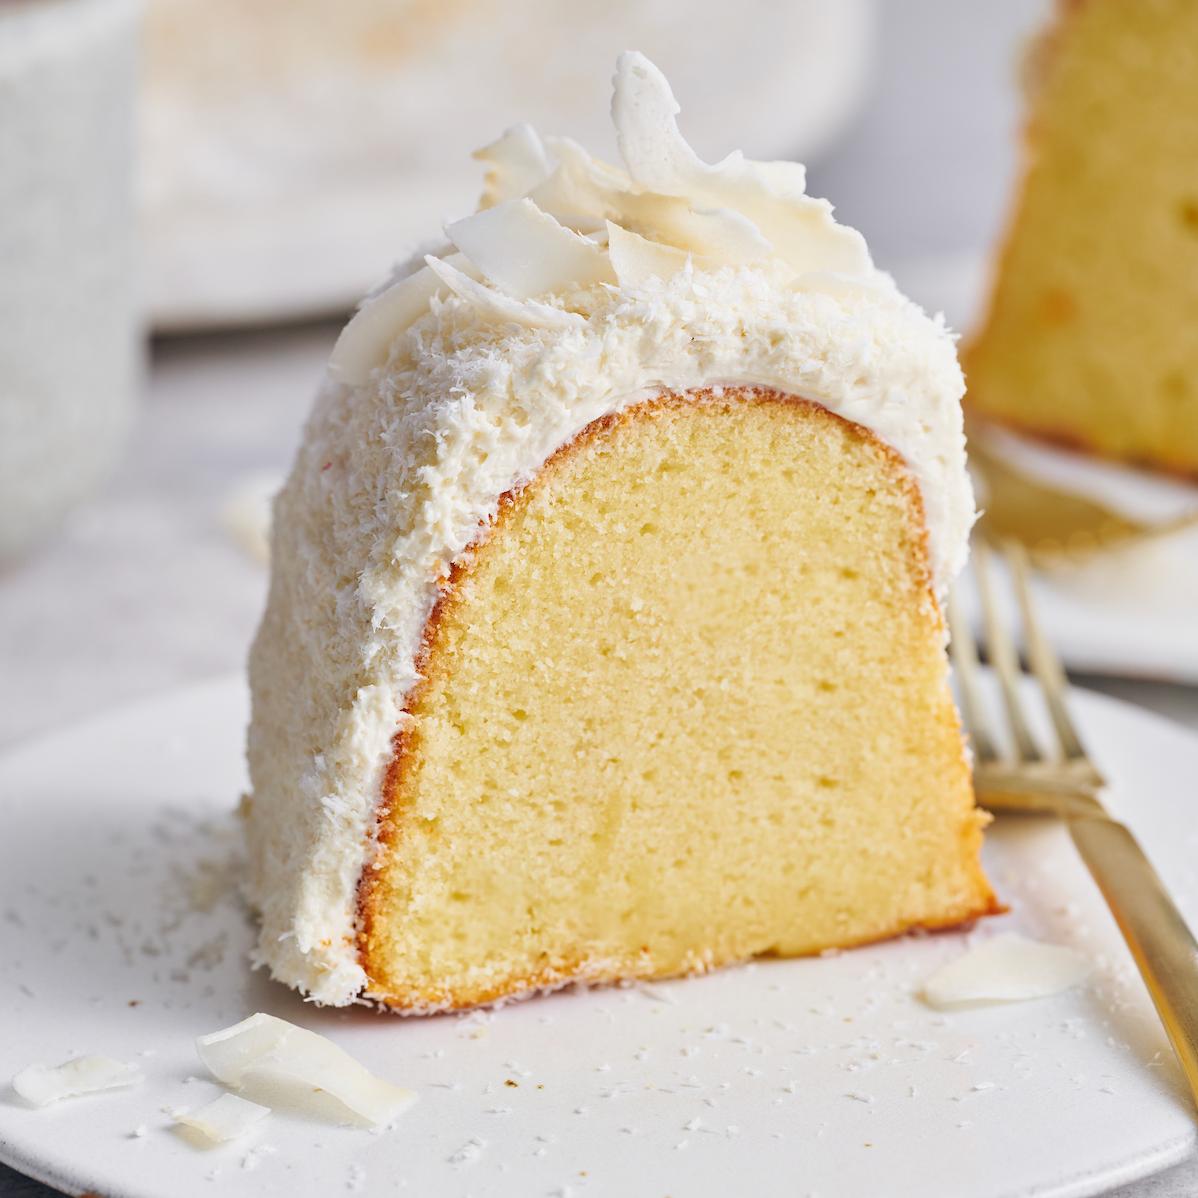  It's not just any ordinary pound cake - it's a white chocolate masterpiece!